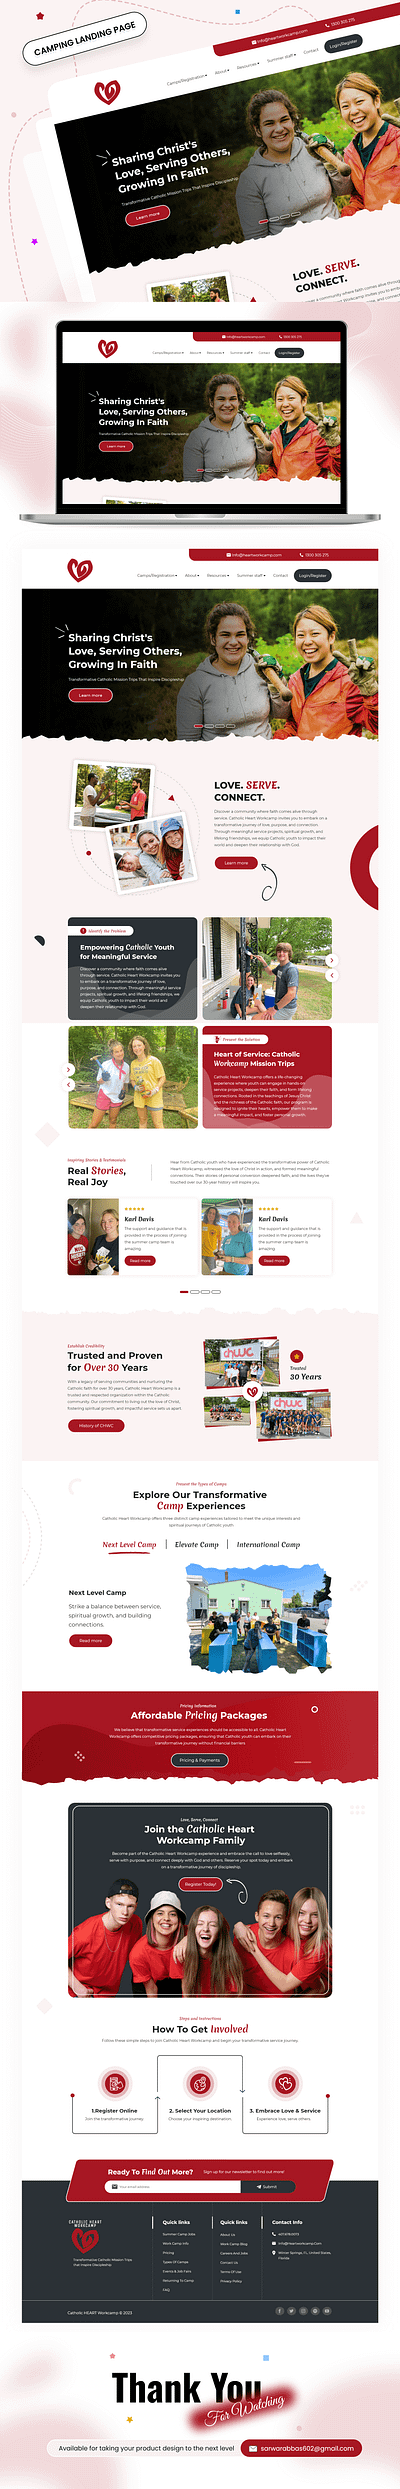 Workcamp landing page bornfire camping camping landing page community education elevate camp friendship international camp journey misson summer camping testimonials transformative journey travel uiux user interface website work camp